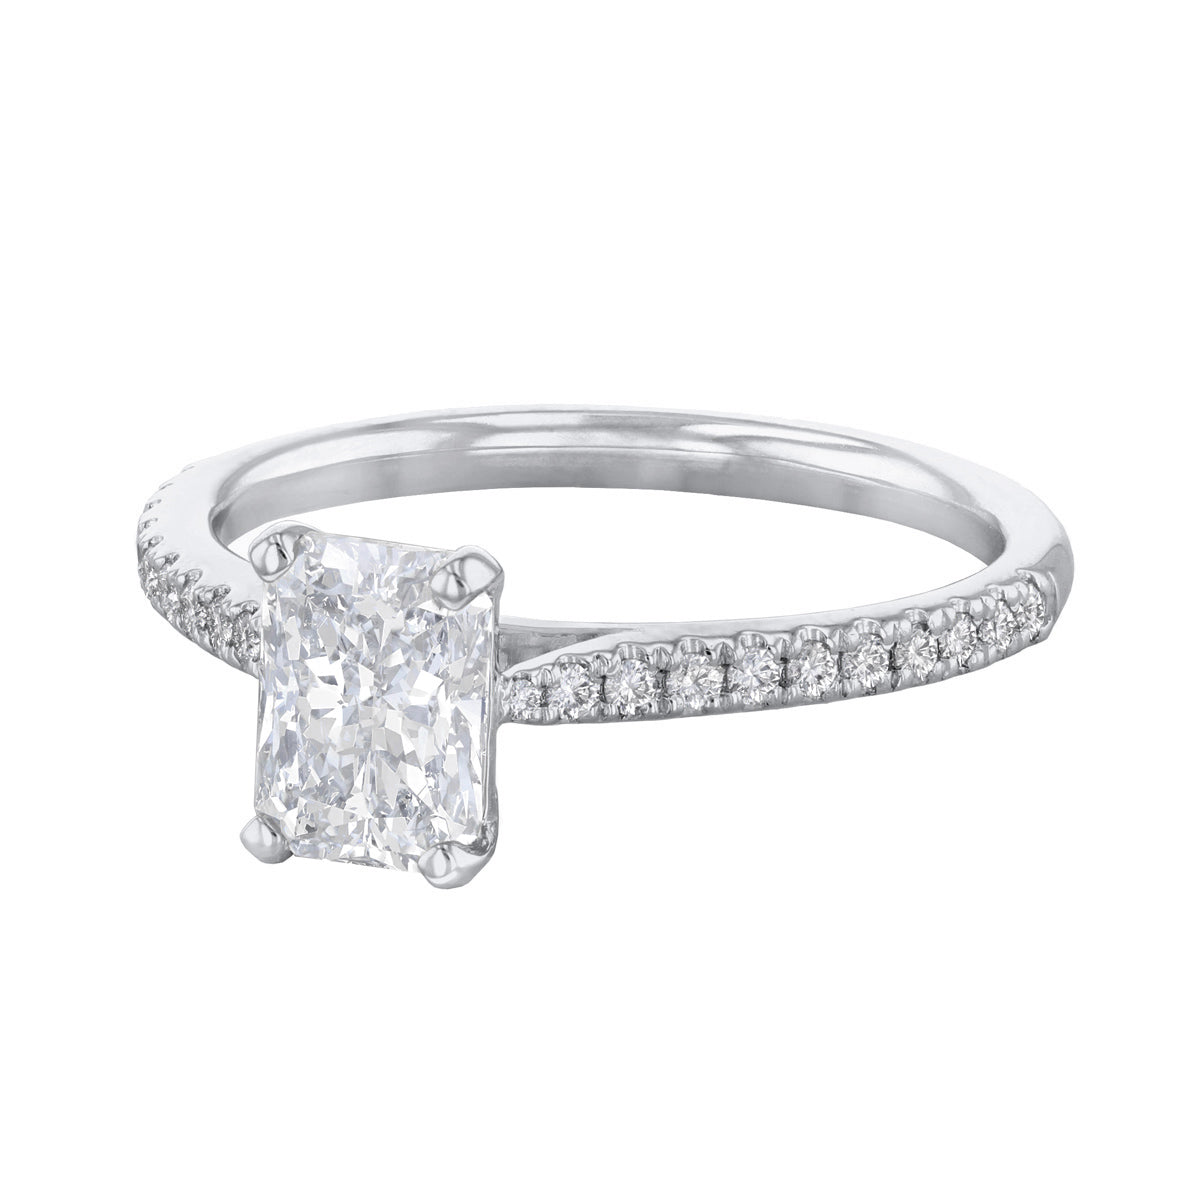 0-75ct-ophelia-shoulder-set-radiant-cut-solitaire-diamond-engagement-ring-18ct-white-gold